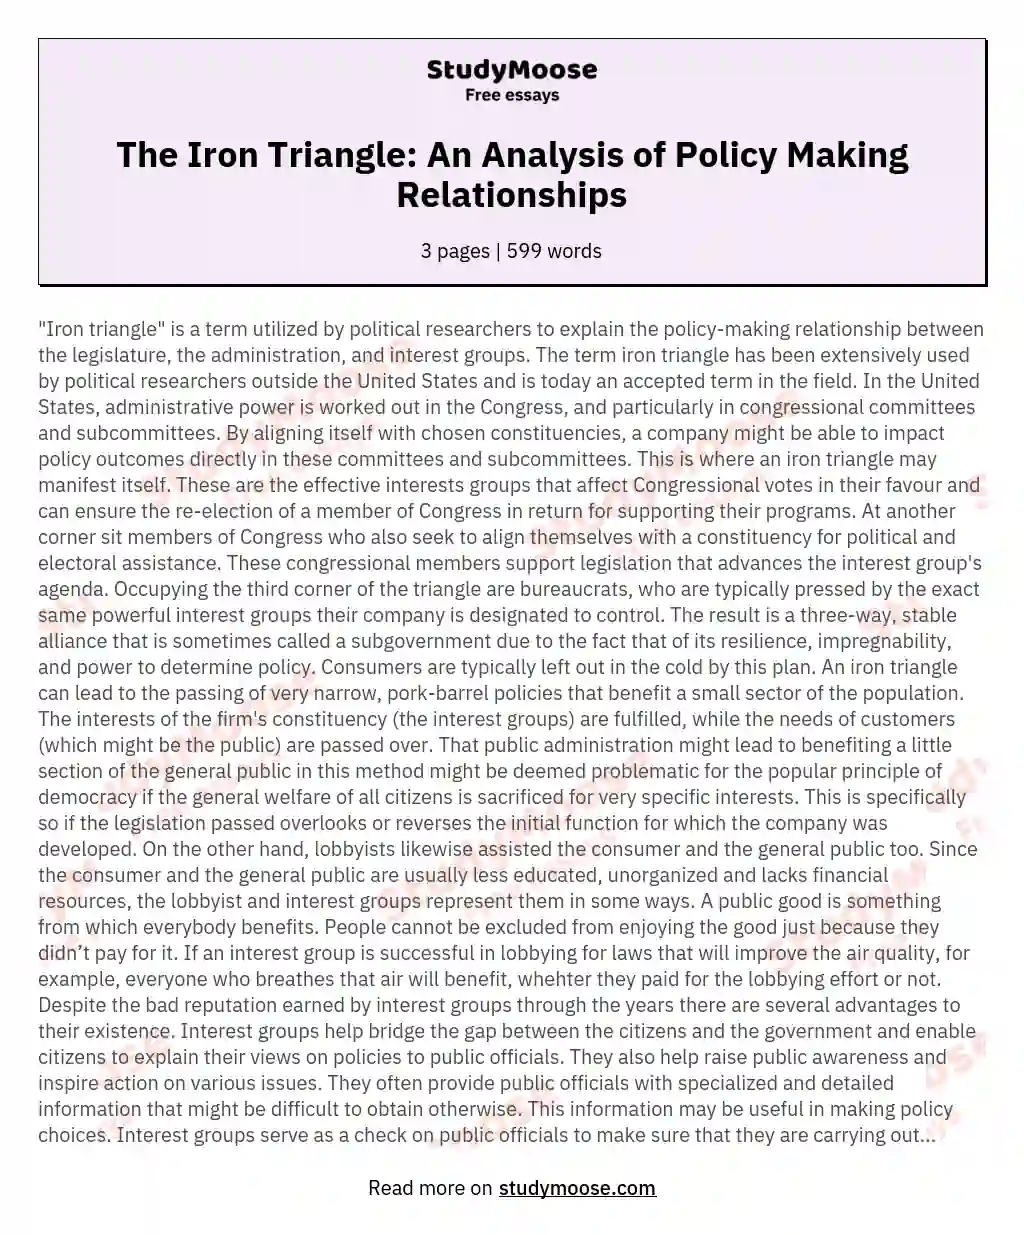 The Iron Triangle: An Analysis of Policy Making Relationships essay